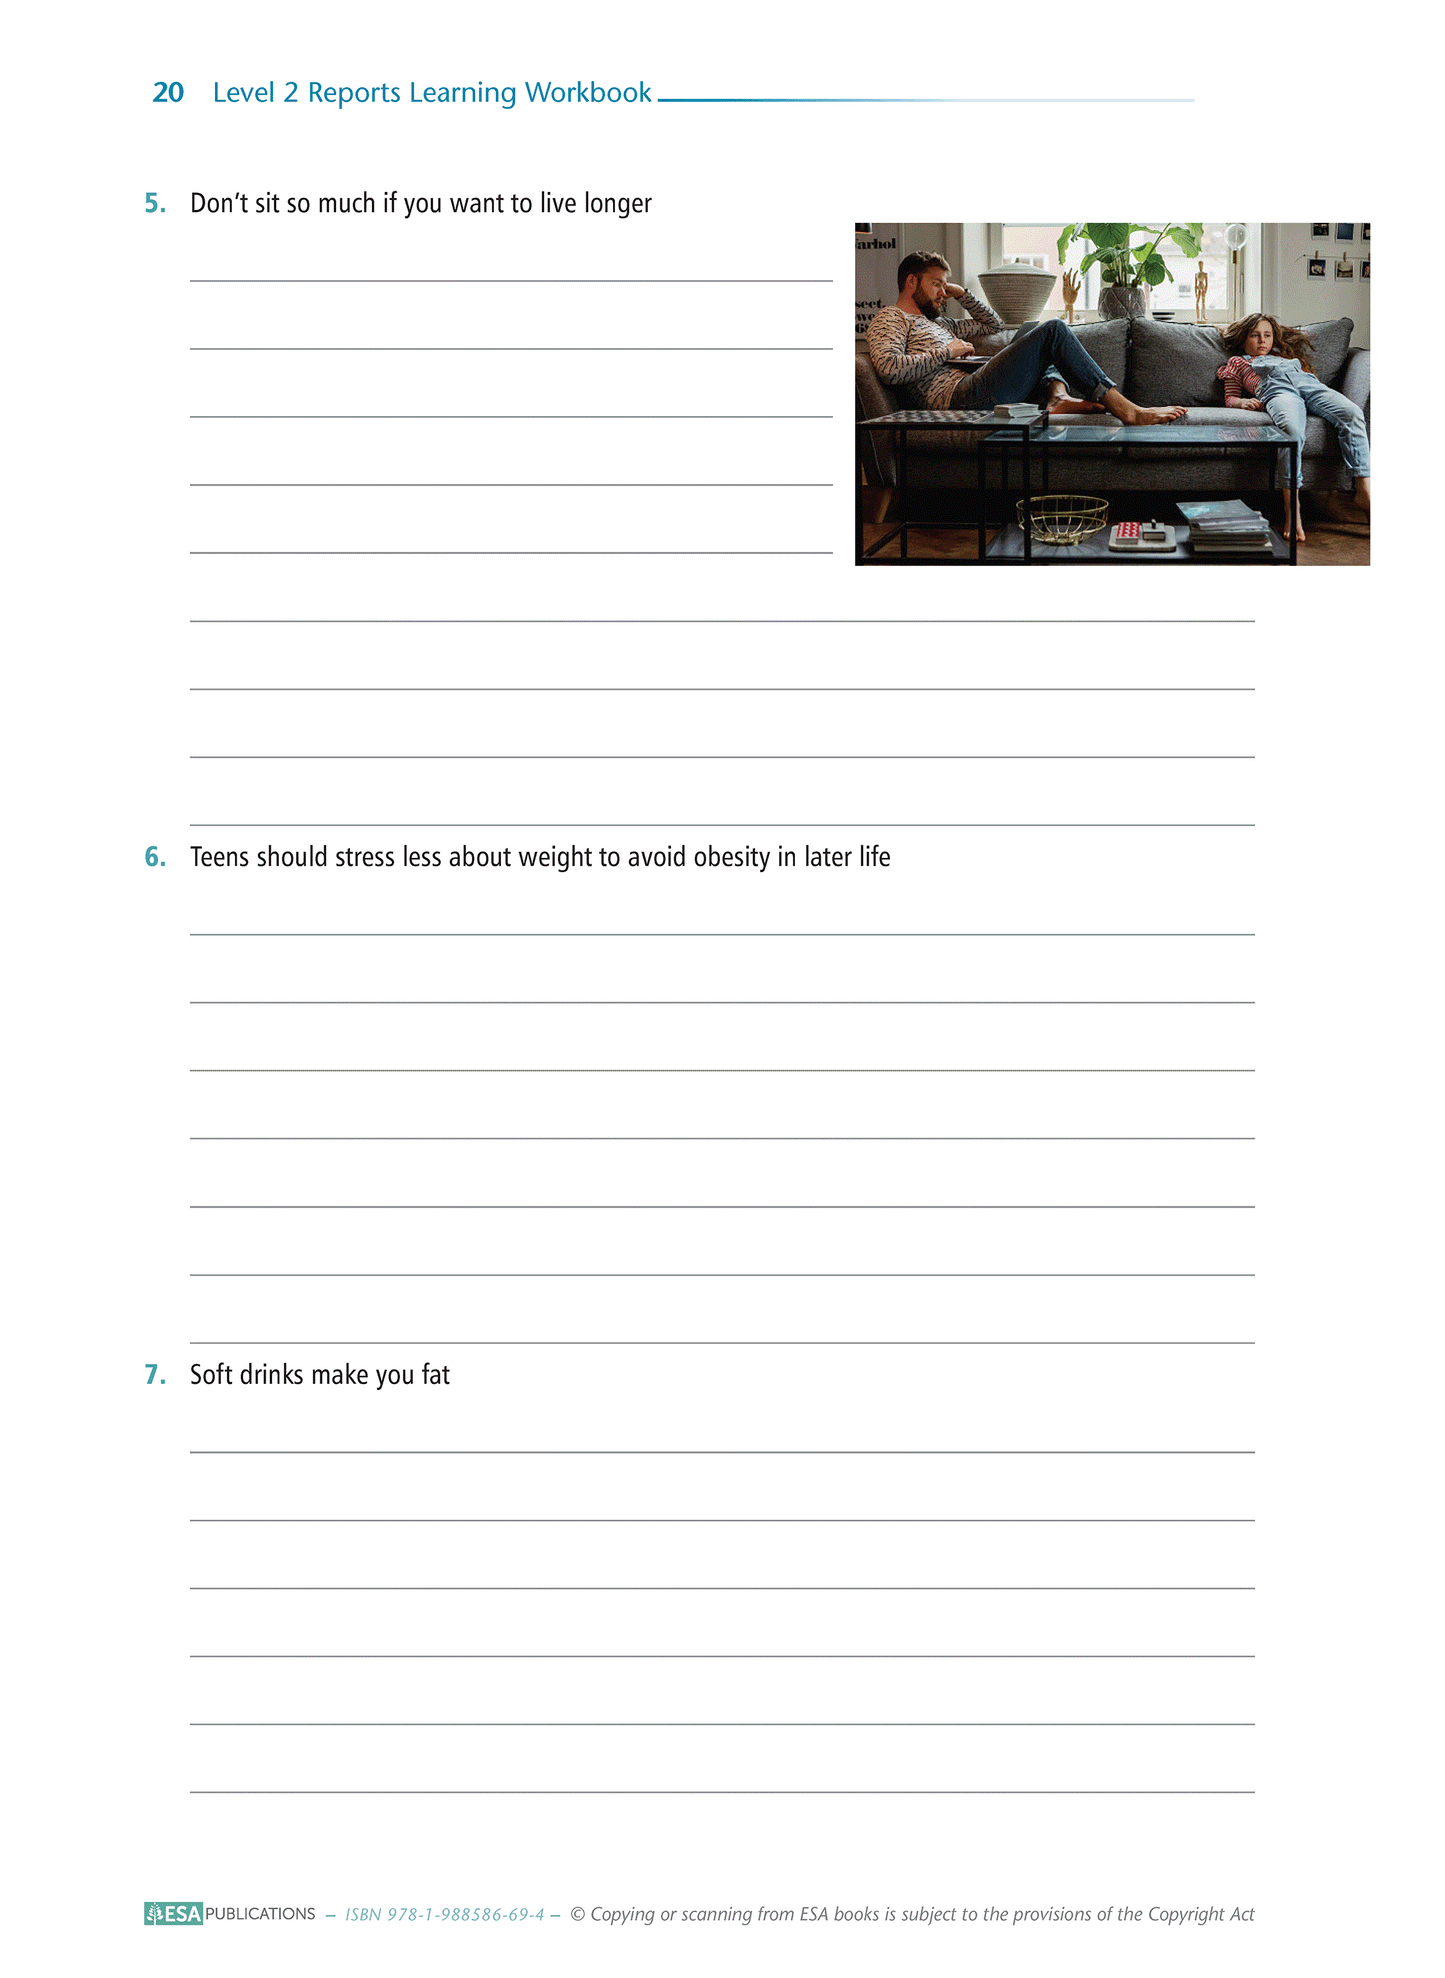 Level 2 Reports 2.11 Learning Workbook